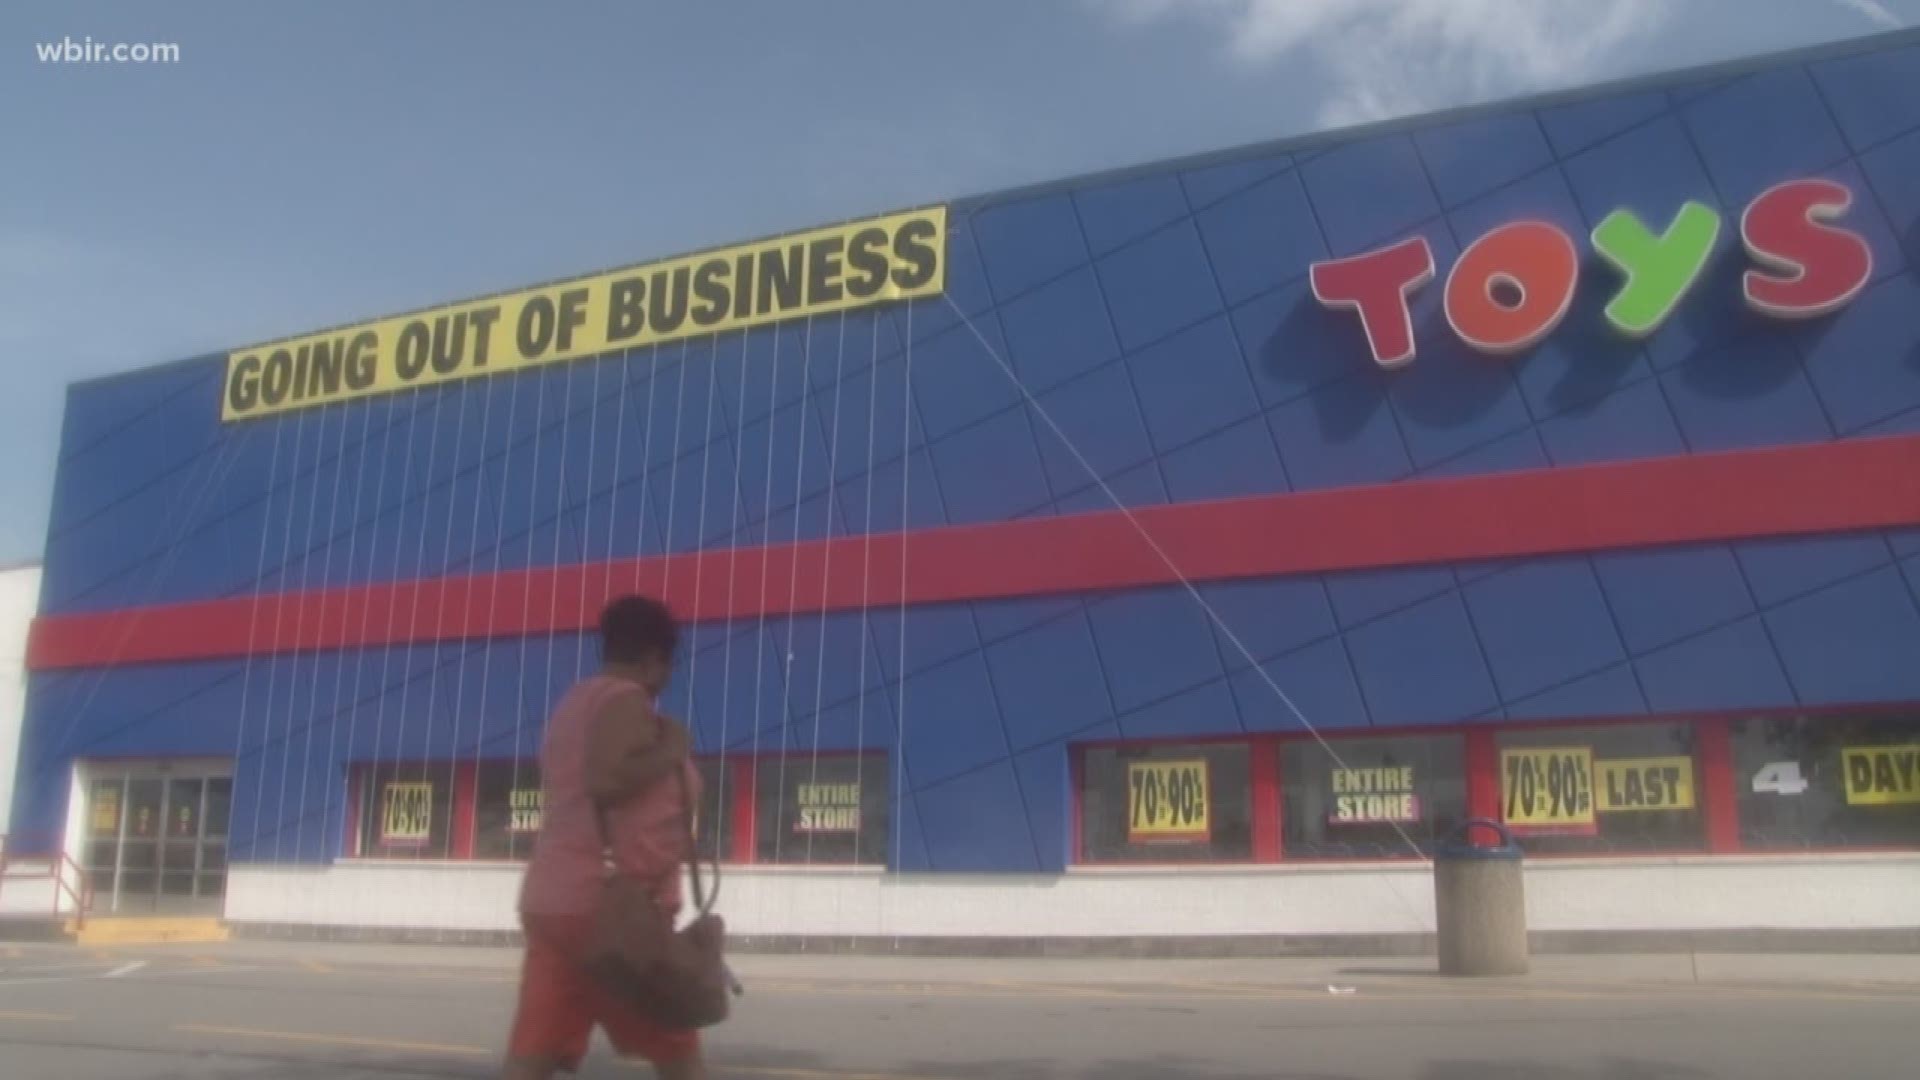 Thursday is the last day people can shop at the iconic big box toy store before it closes its doors.